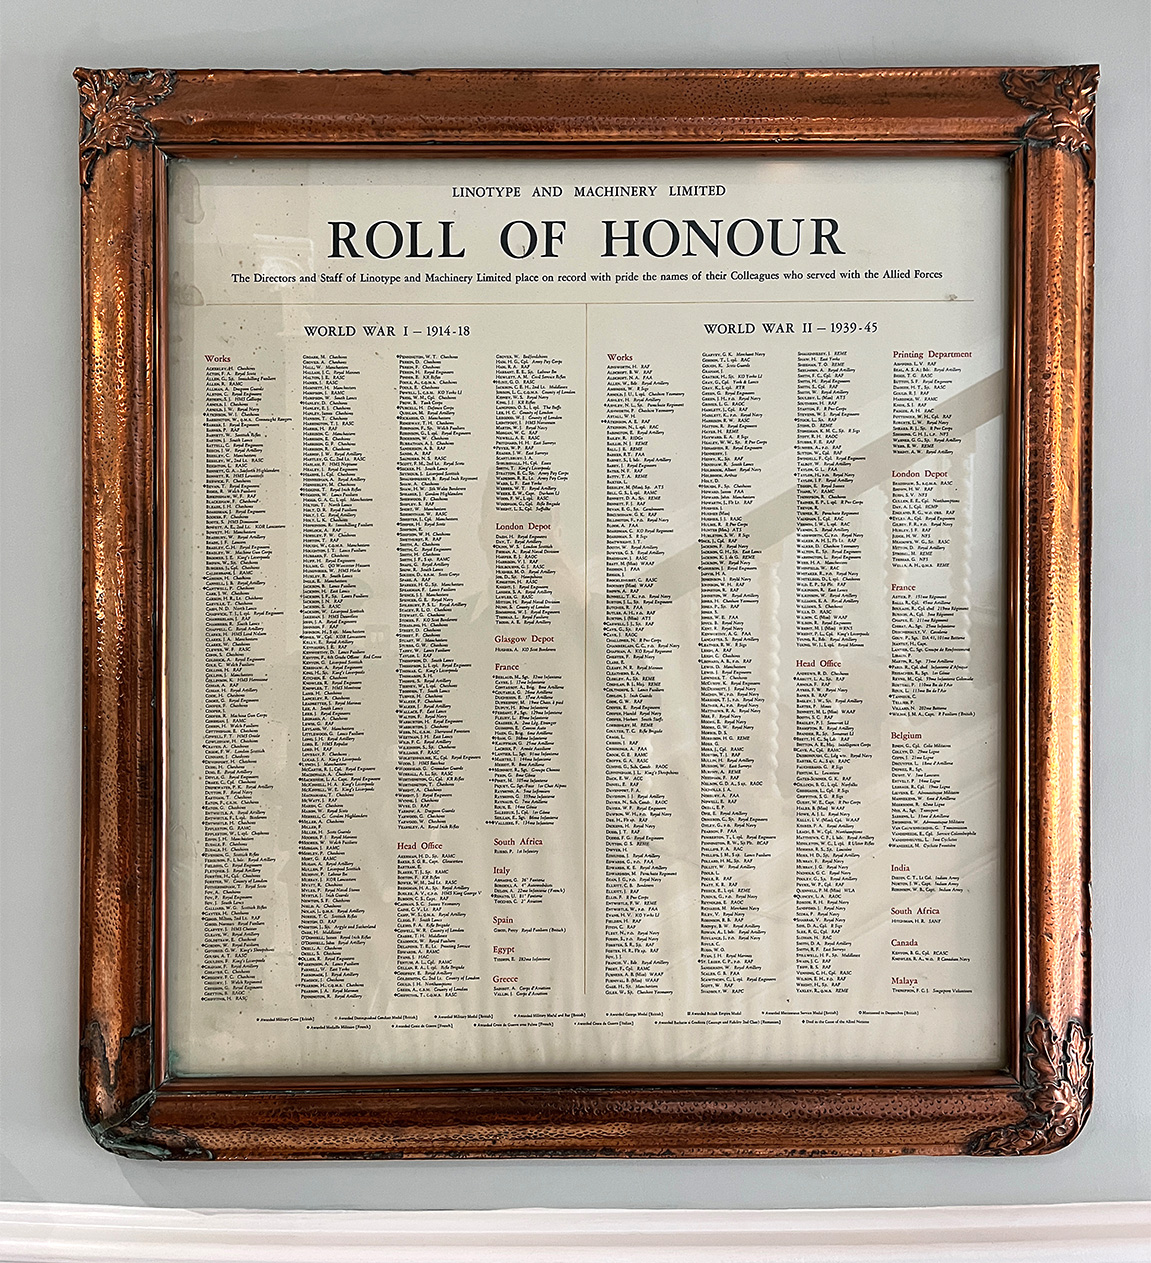 Original printed Roll of Honour inside the building, which inspired the new monument outside.